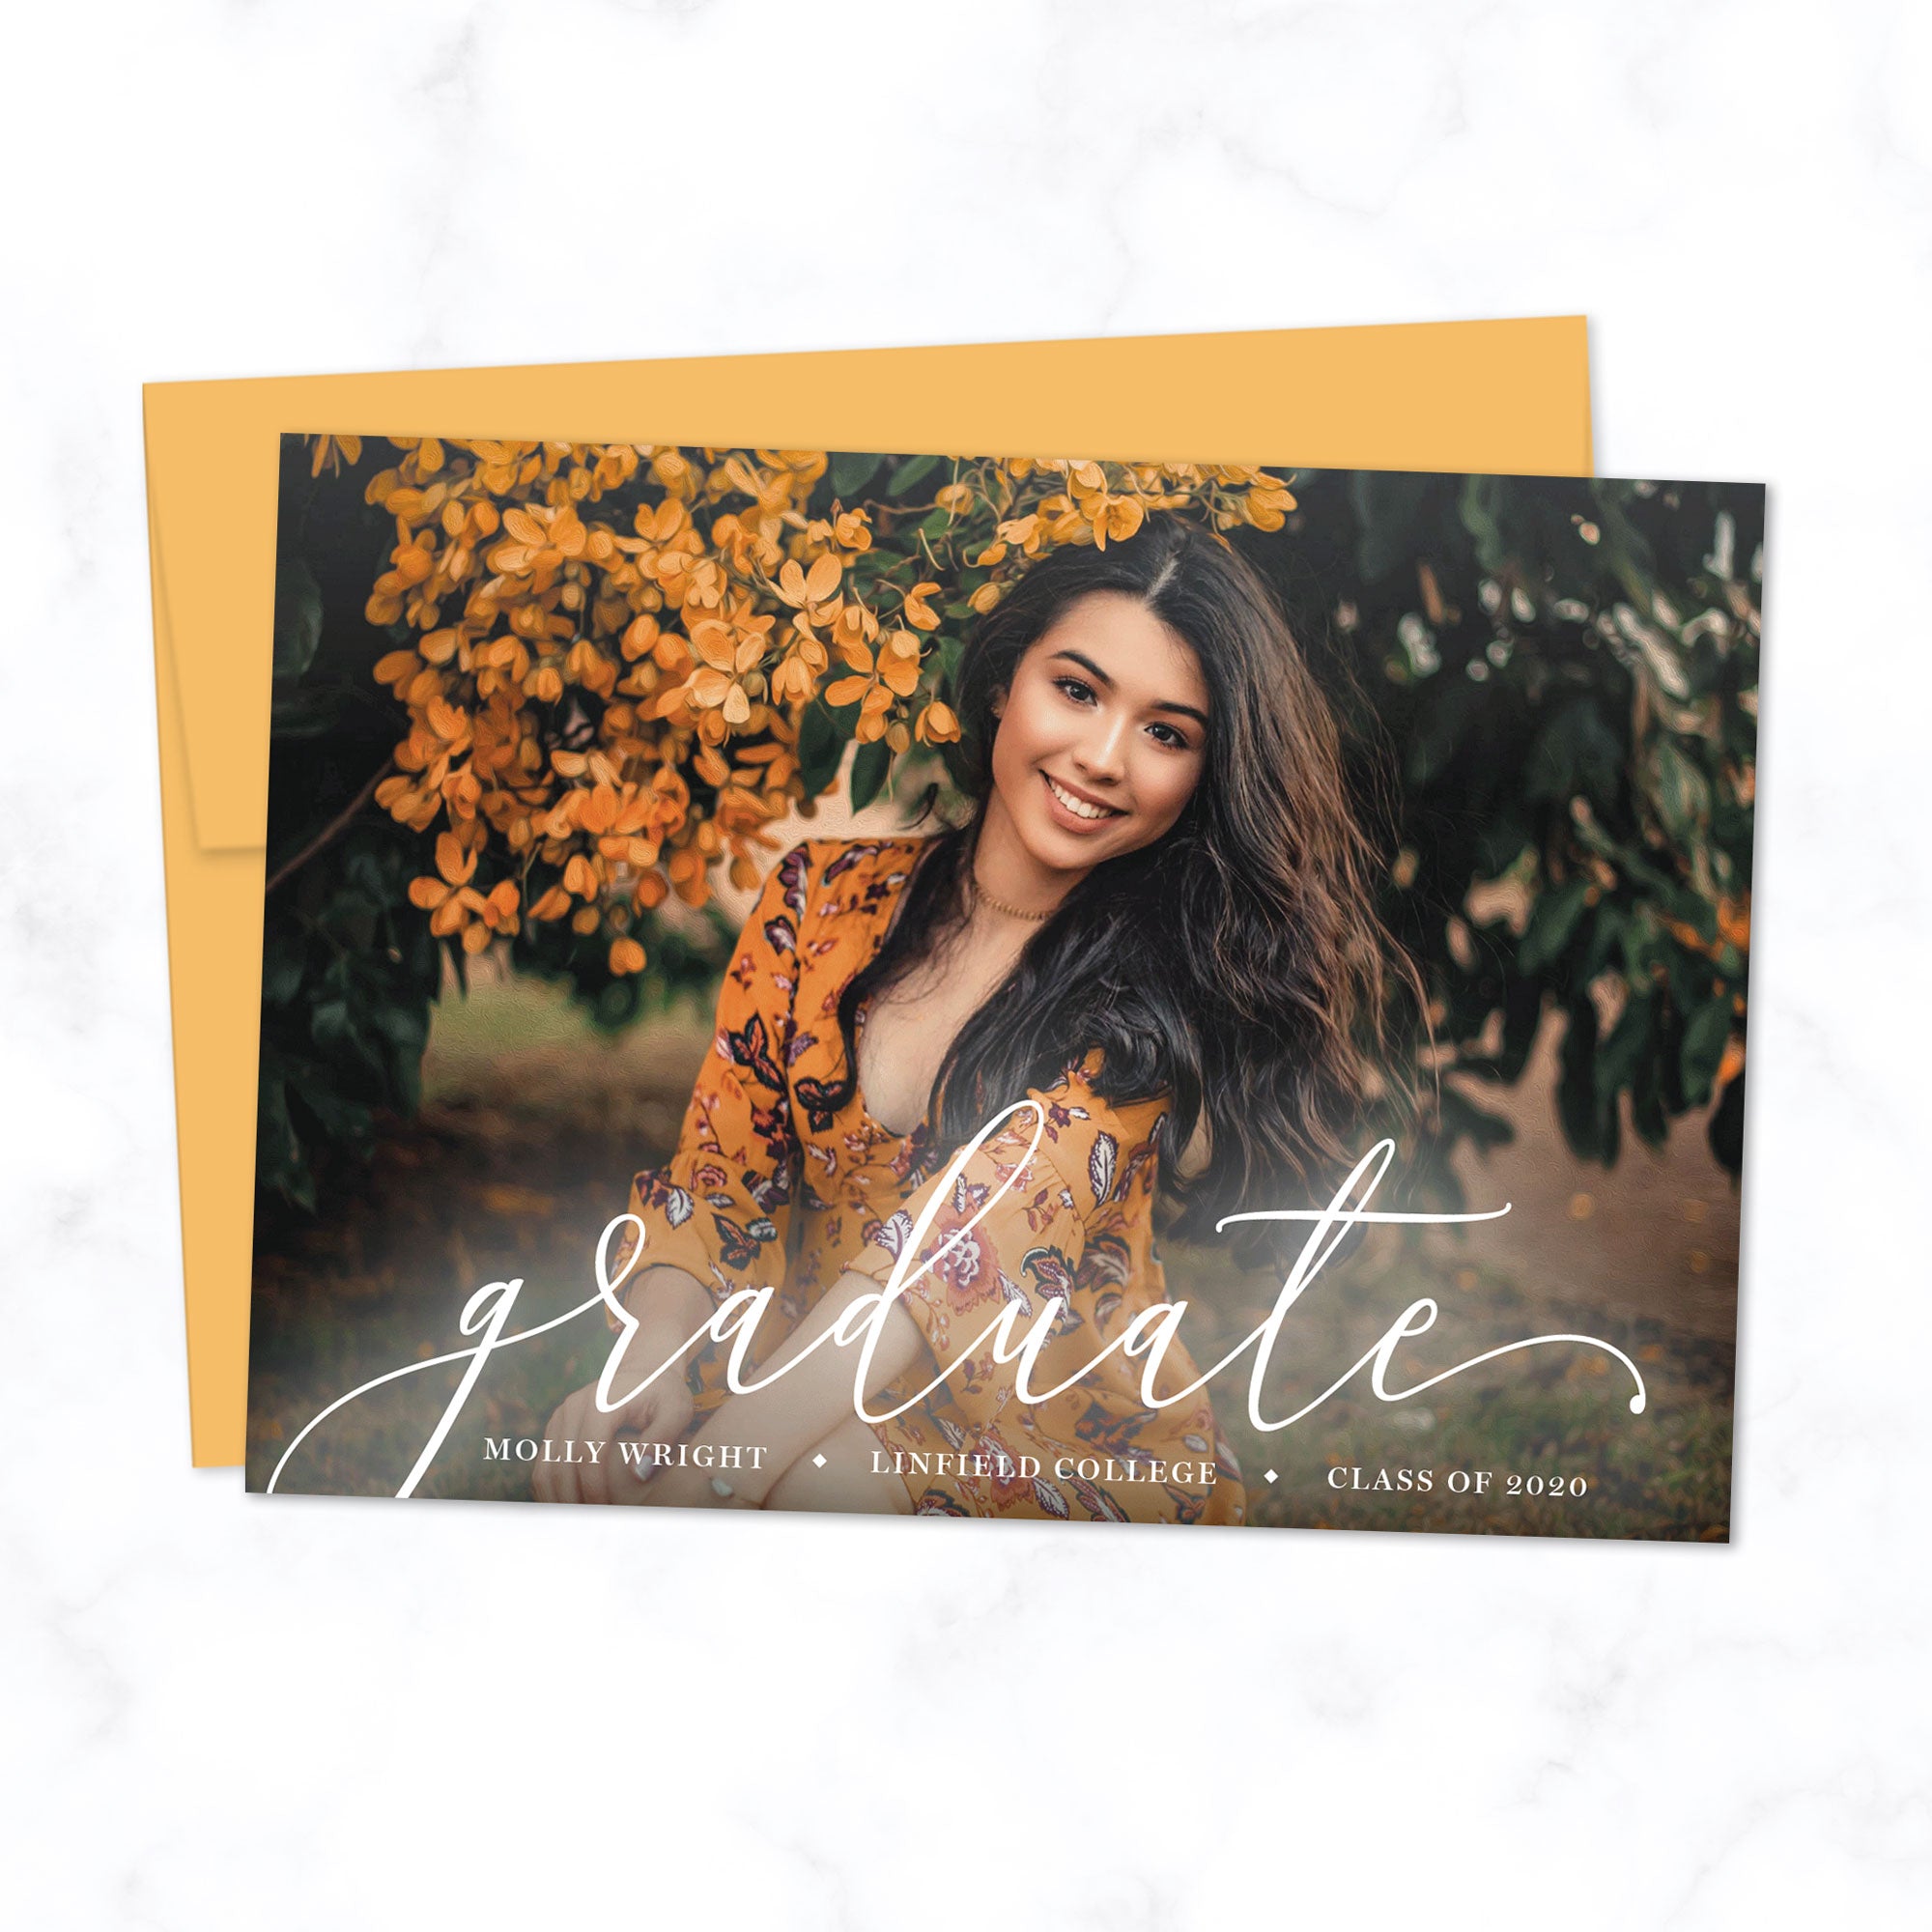 Graduation Announcement Photo Card with Modern Elegant Script Font and Full Photo Background, Shown with Citrine Orange Envelope